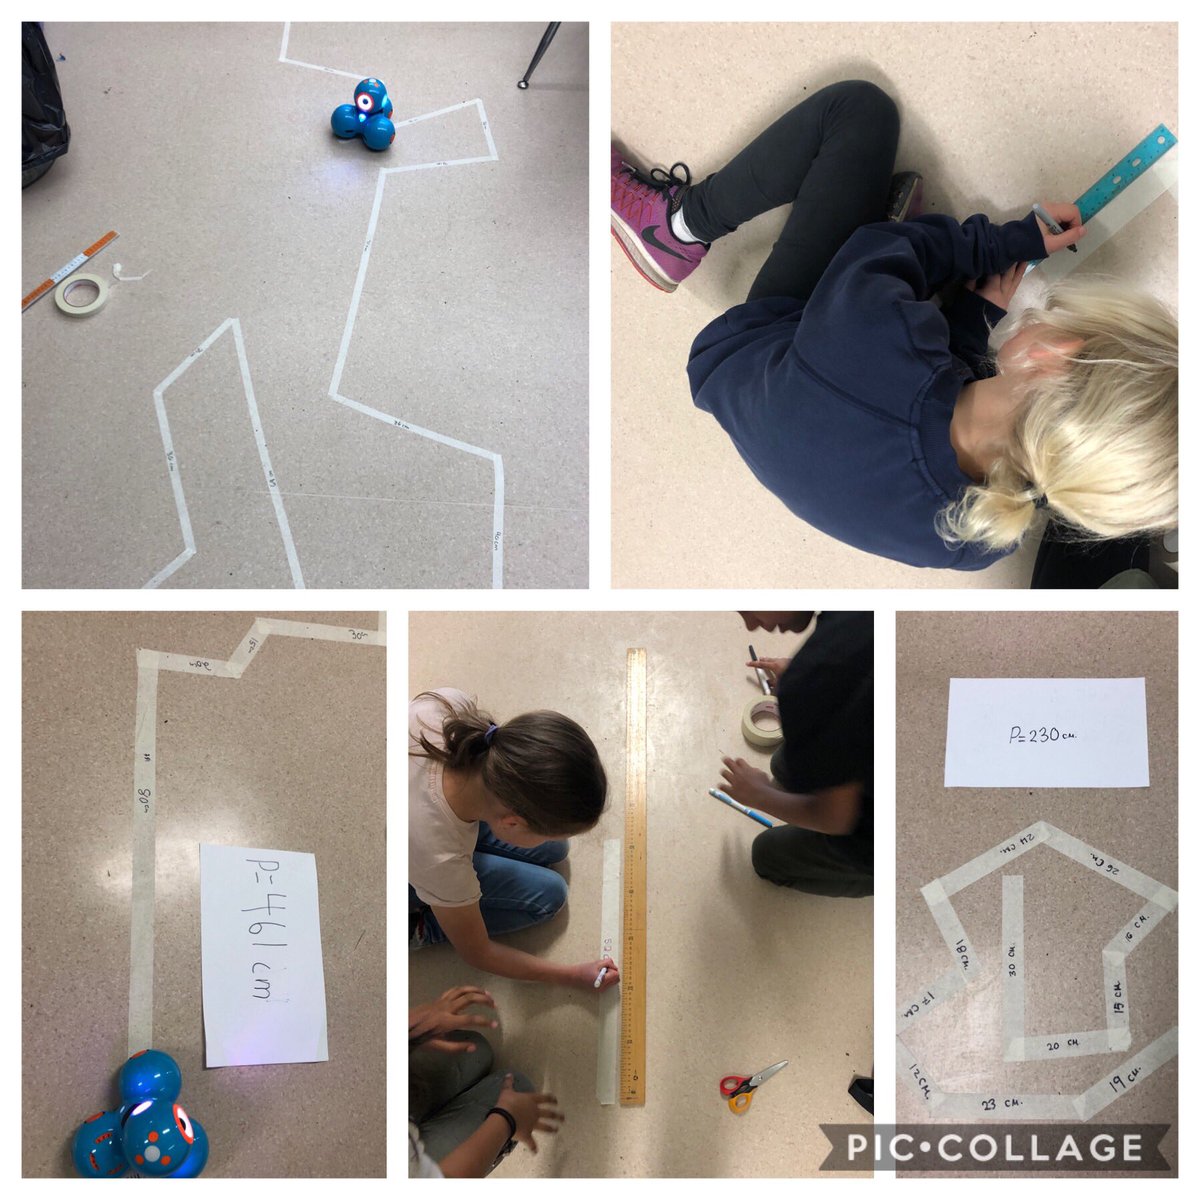 We ❤️ combining math and robotics @crescentpark36 We enjoyed calculating the perimeter of Dash’s pathway! #sd36learn